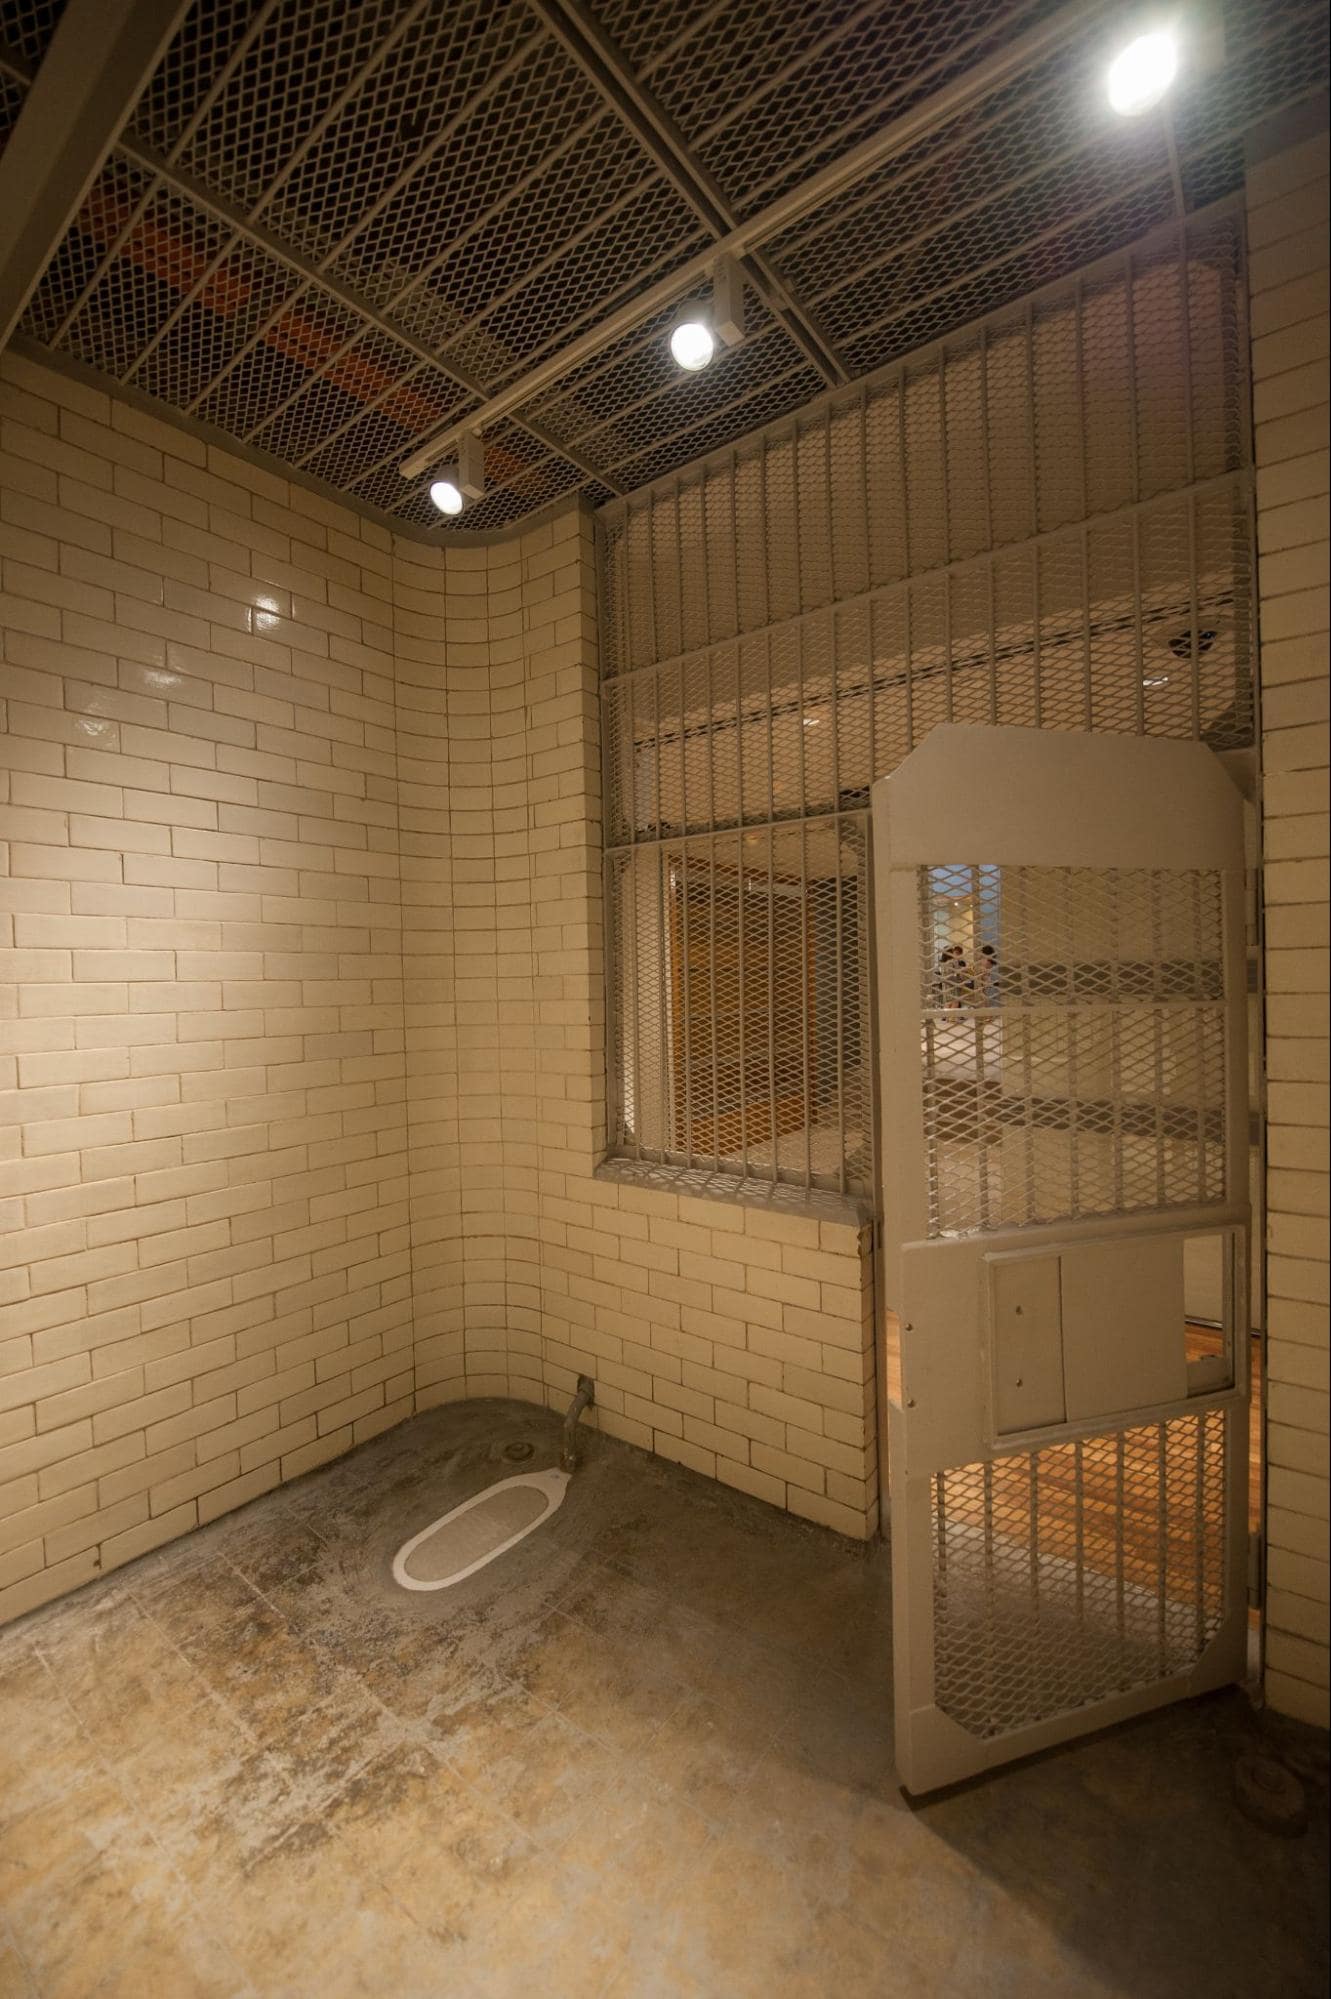 National Gallery Singapore secrets revealed - old jail cell toilet